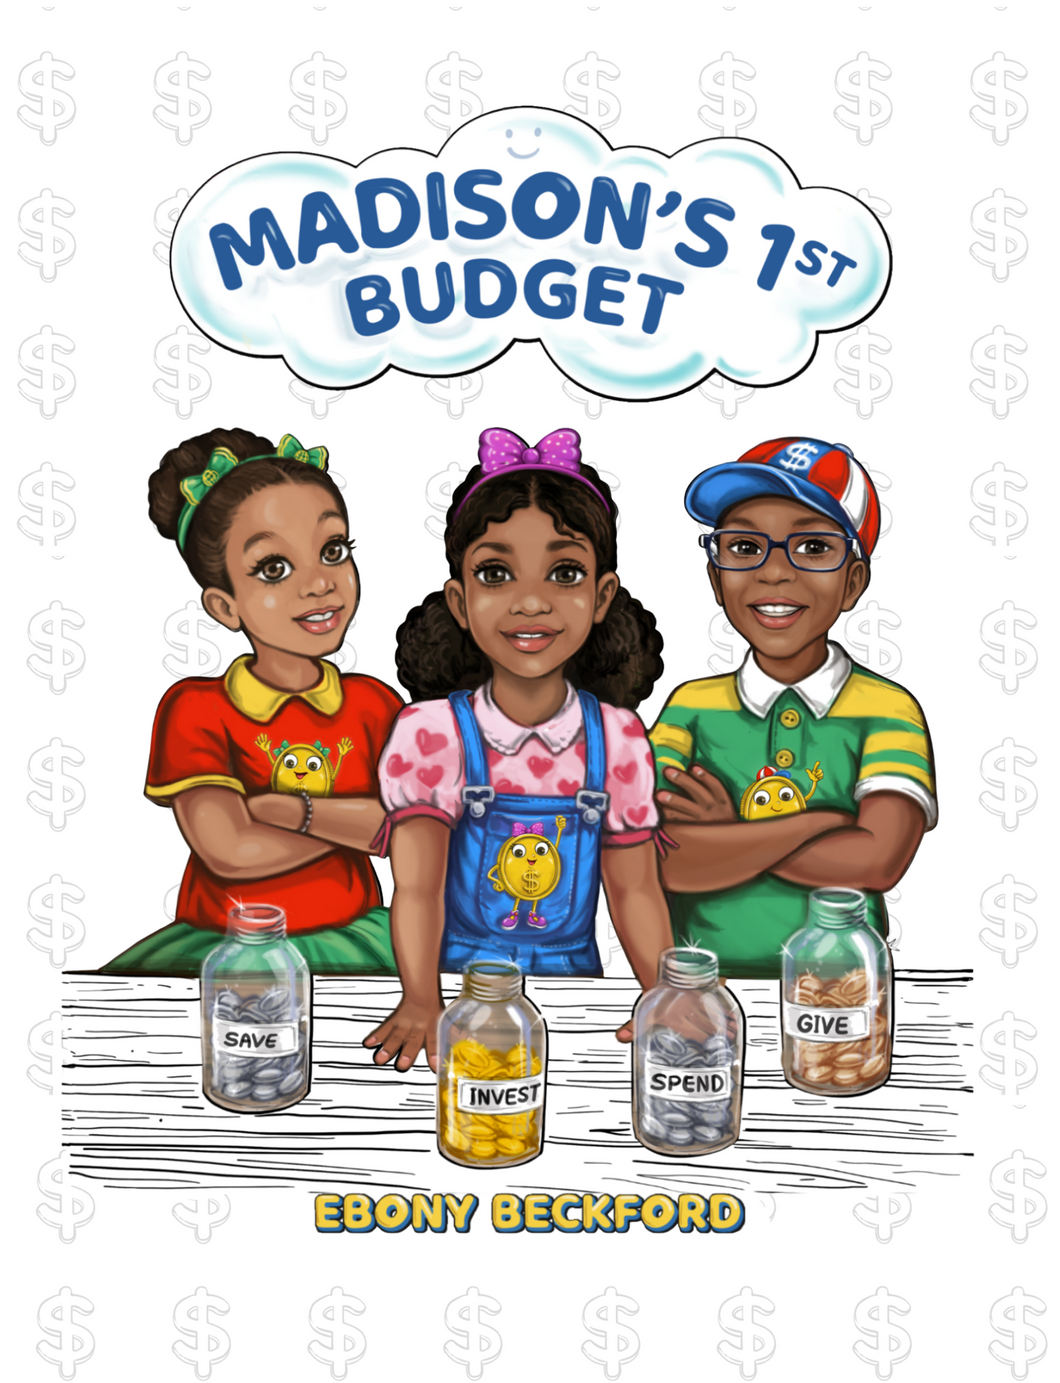 Madison's 1st Budget - A Coloring Book About Money Management